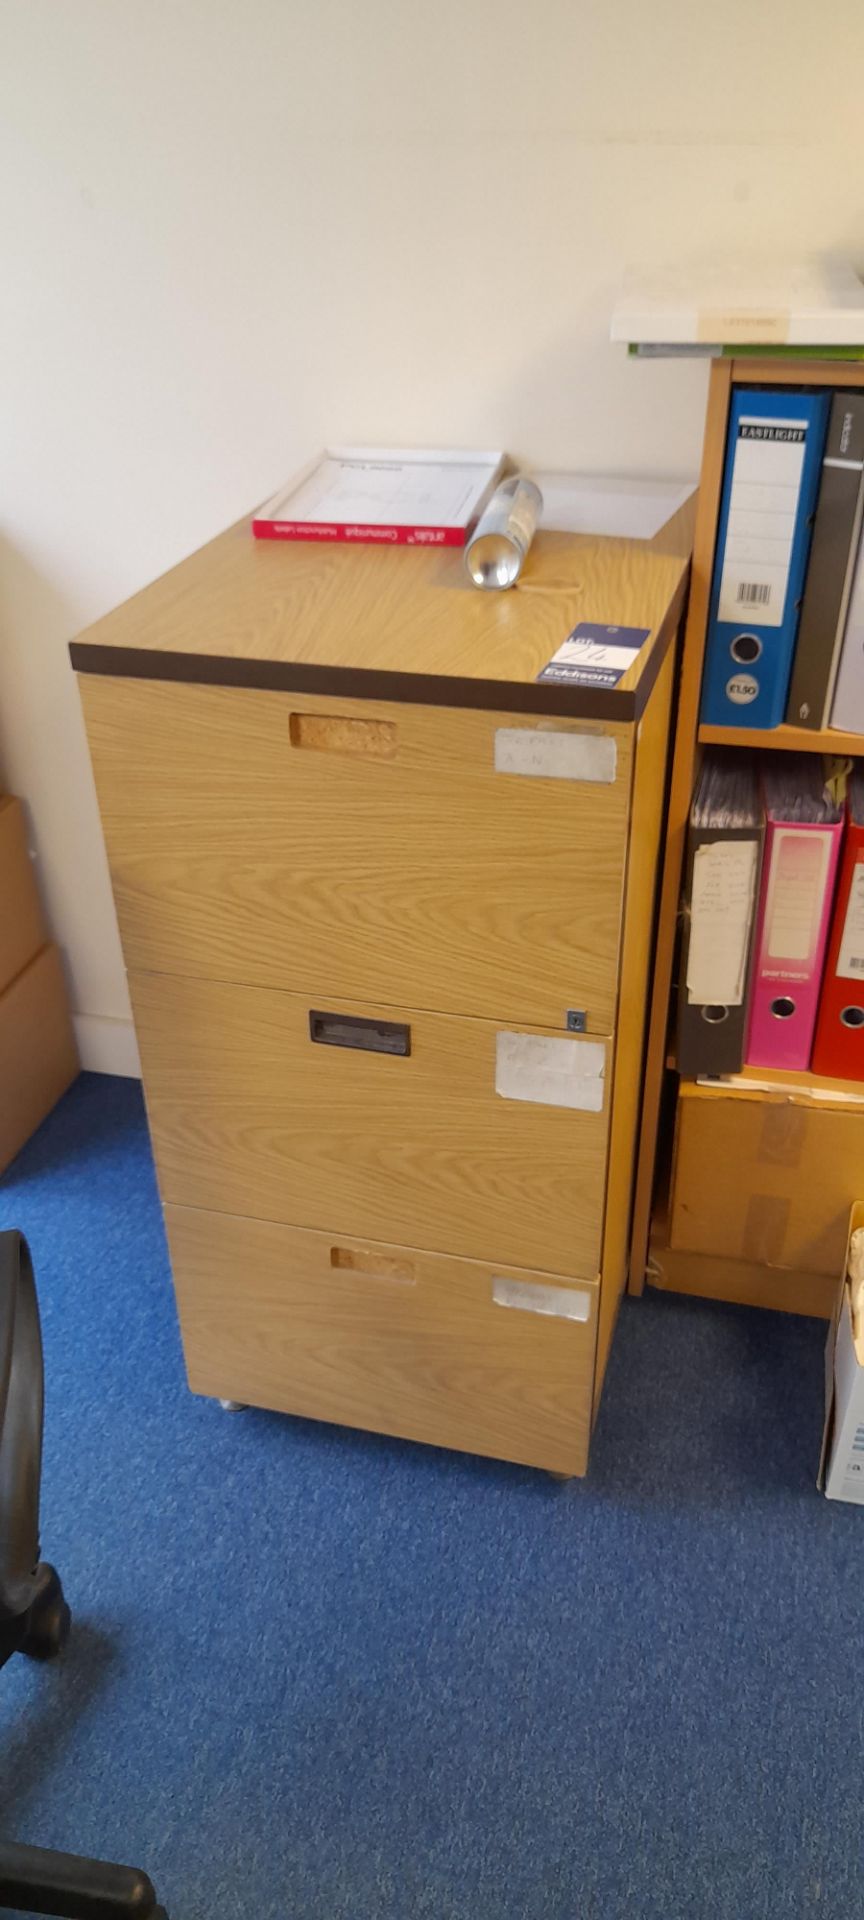 1x 4 drawer and 1x 3 drawer matching wood effect filing cabinets. Contents excluded - Image 3 of 3